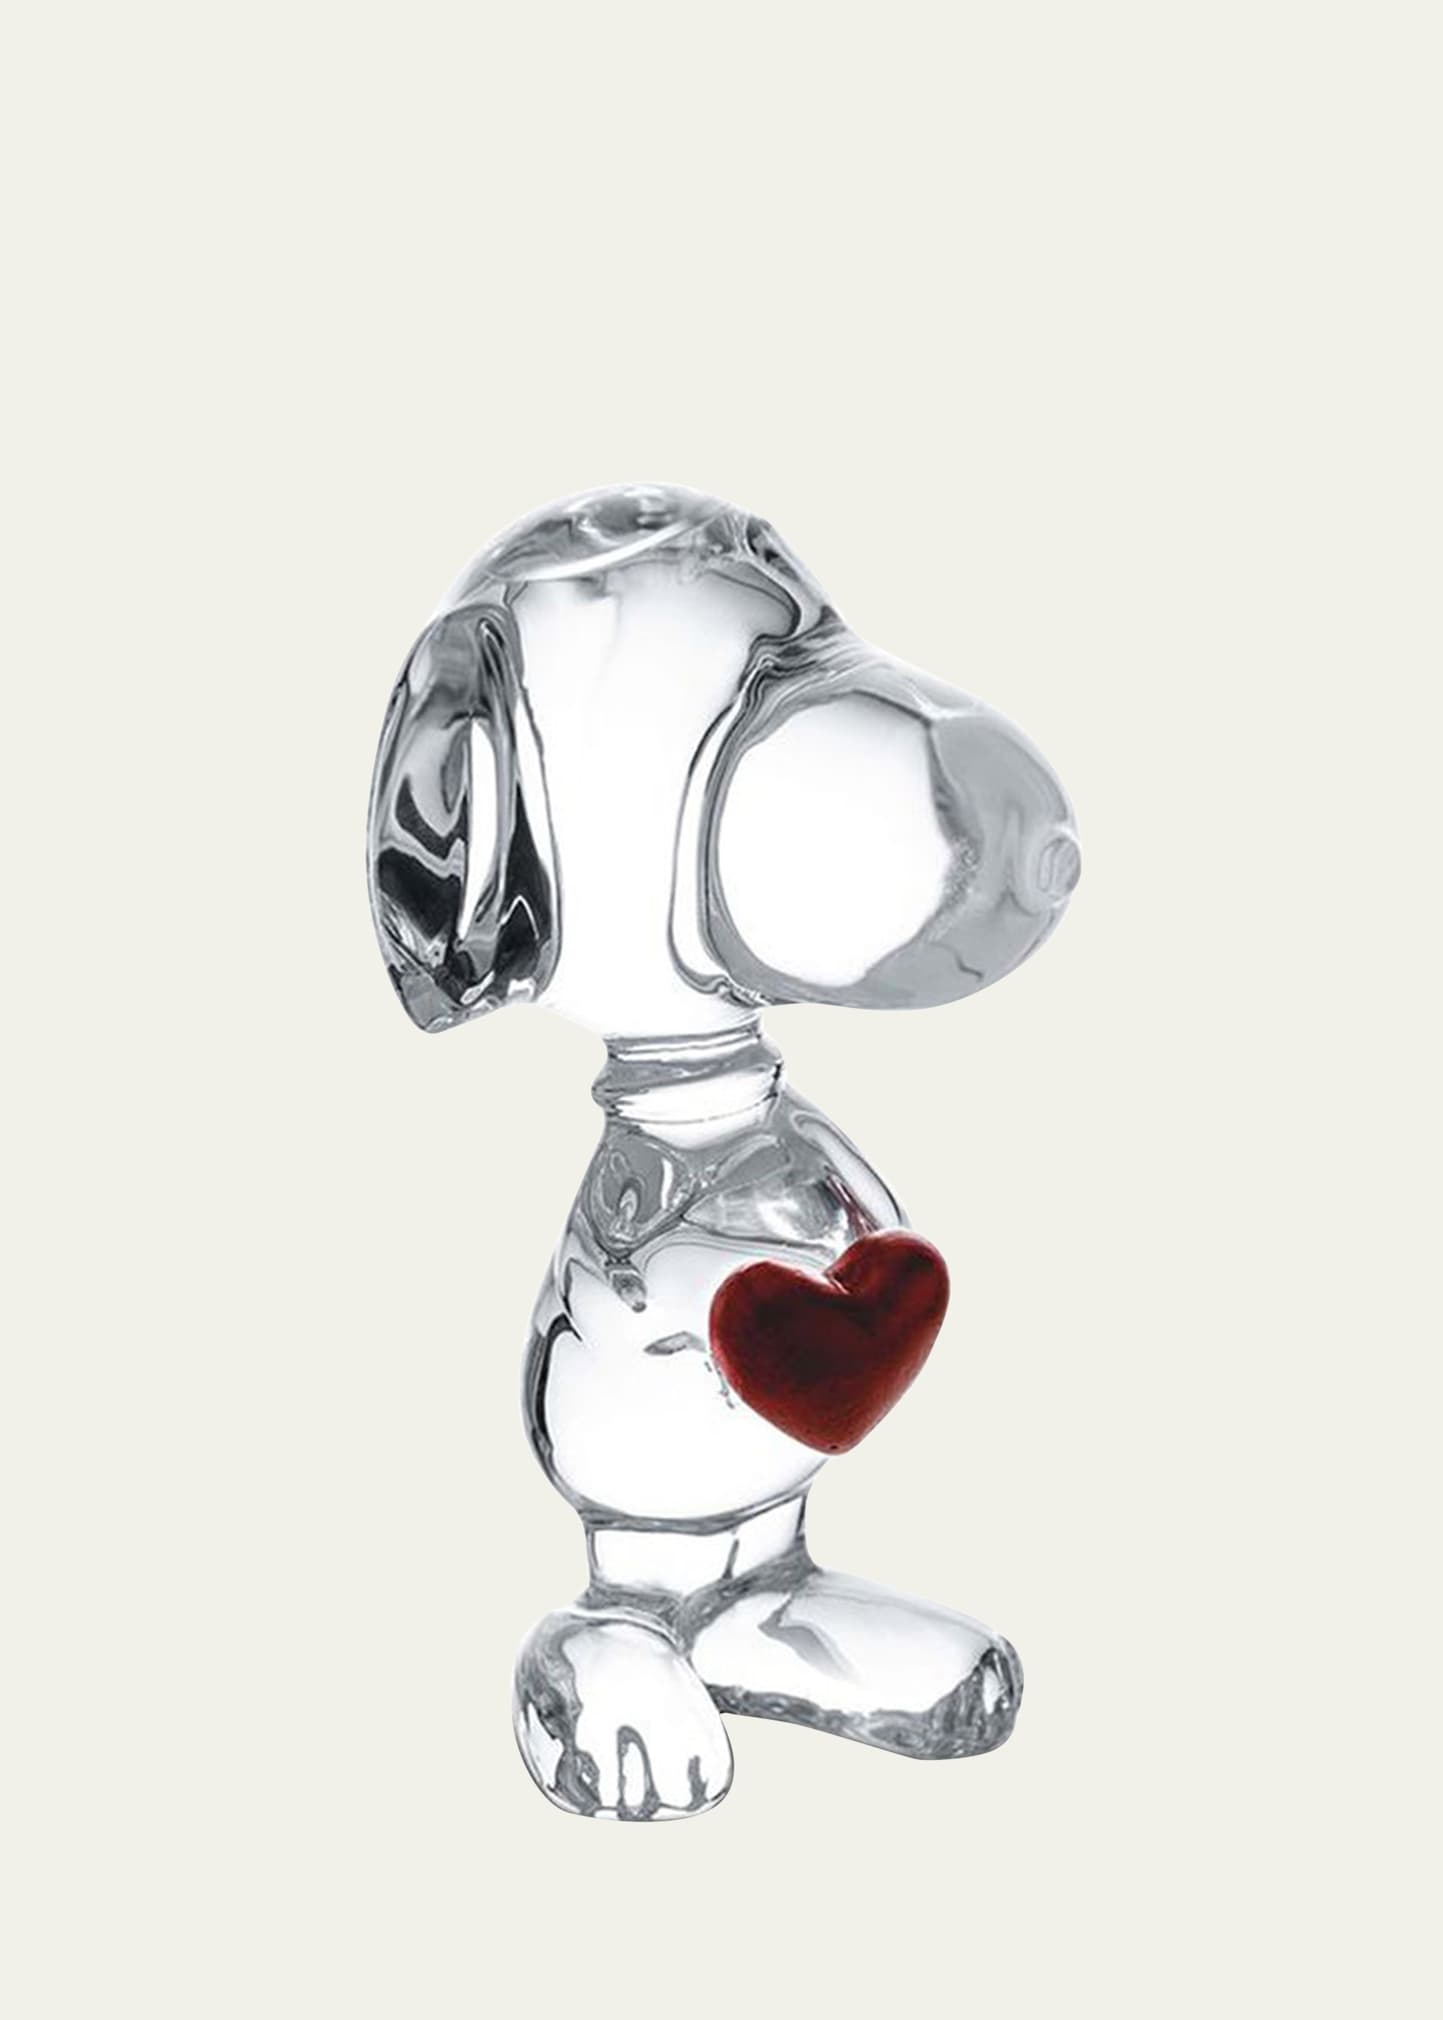 Snoopy with Heart Figurine